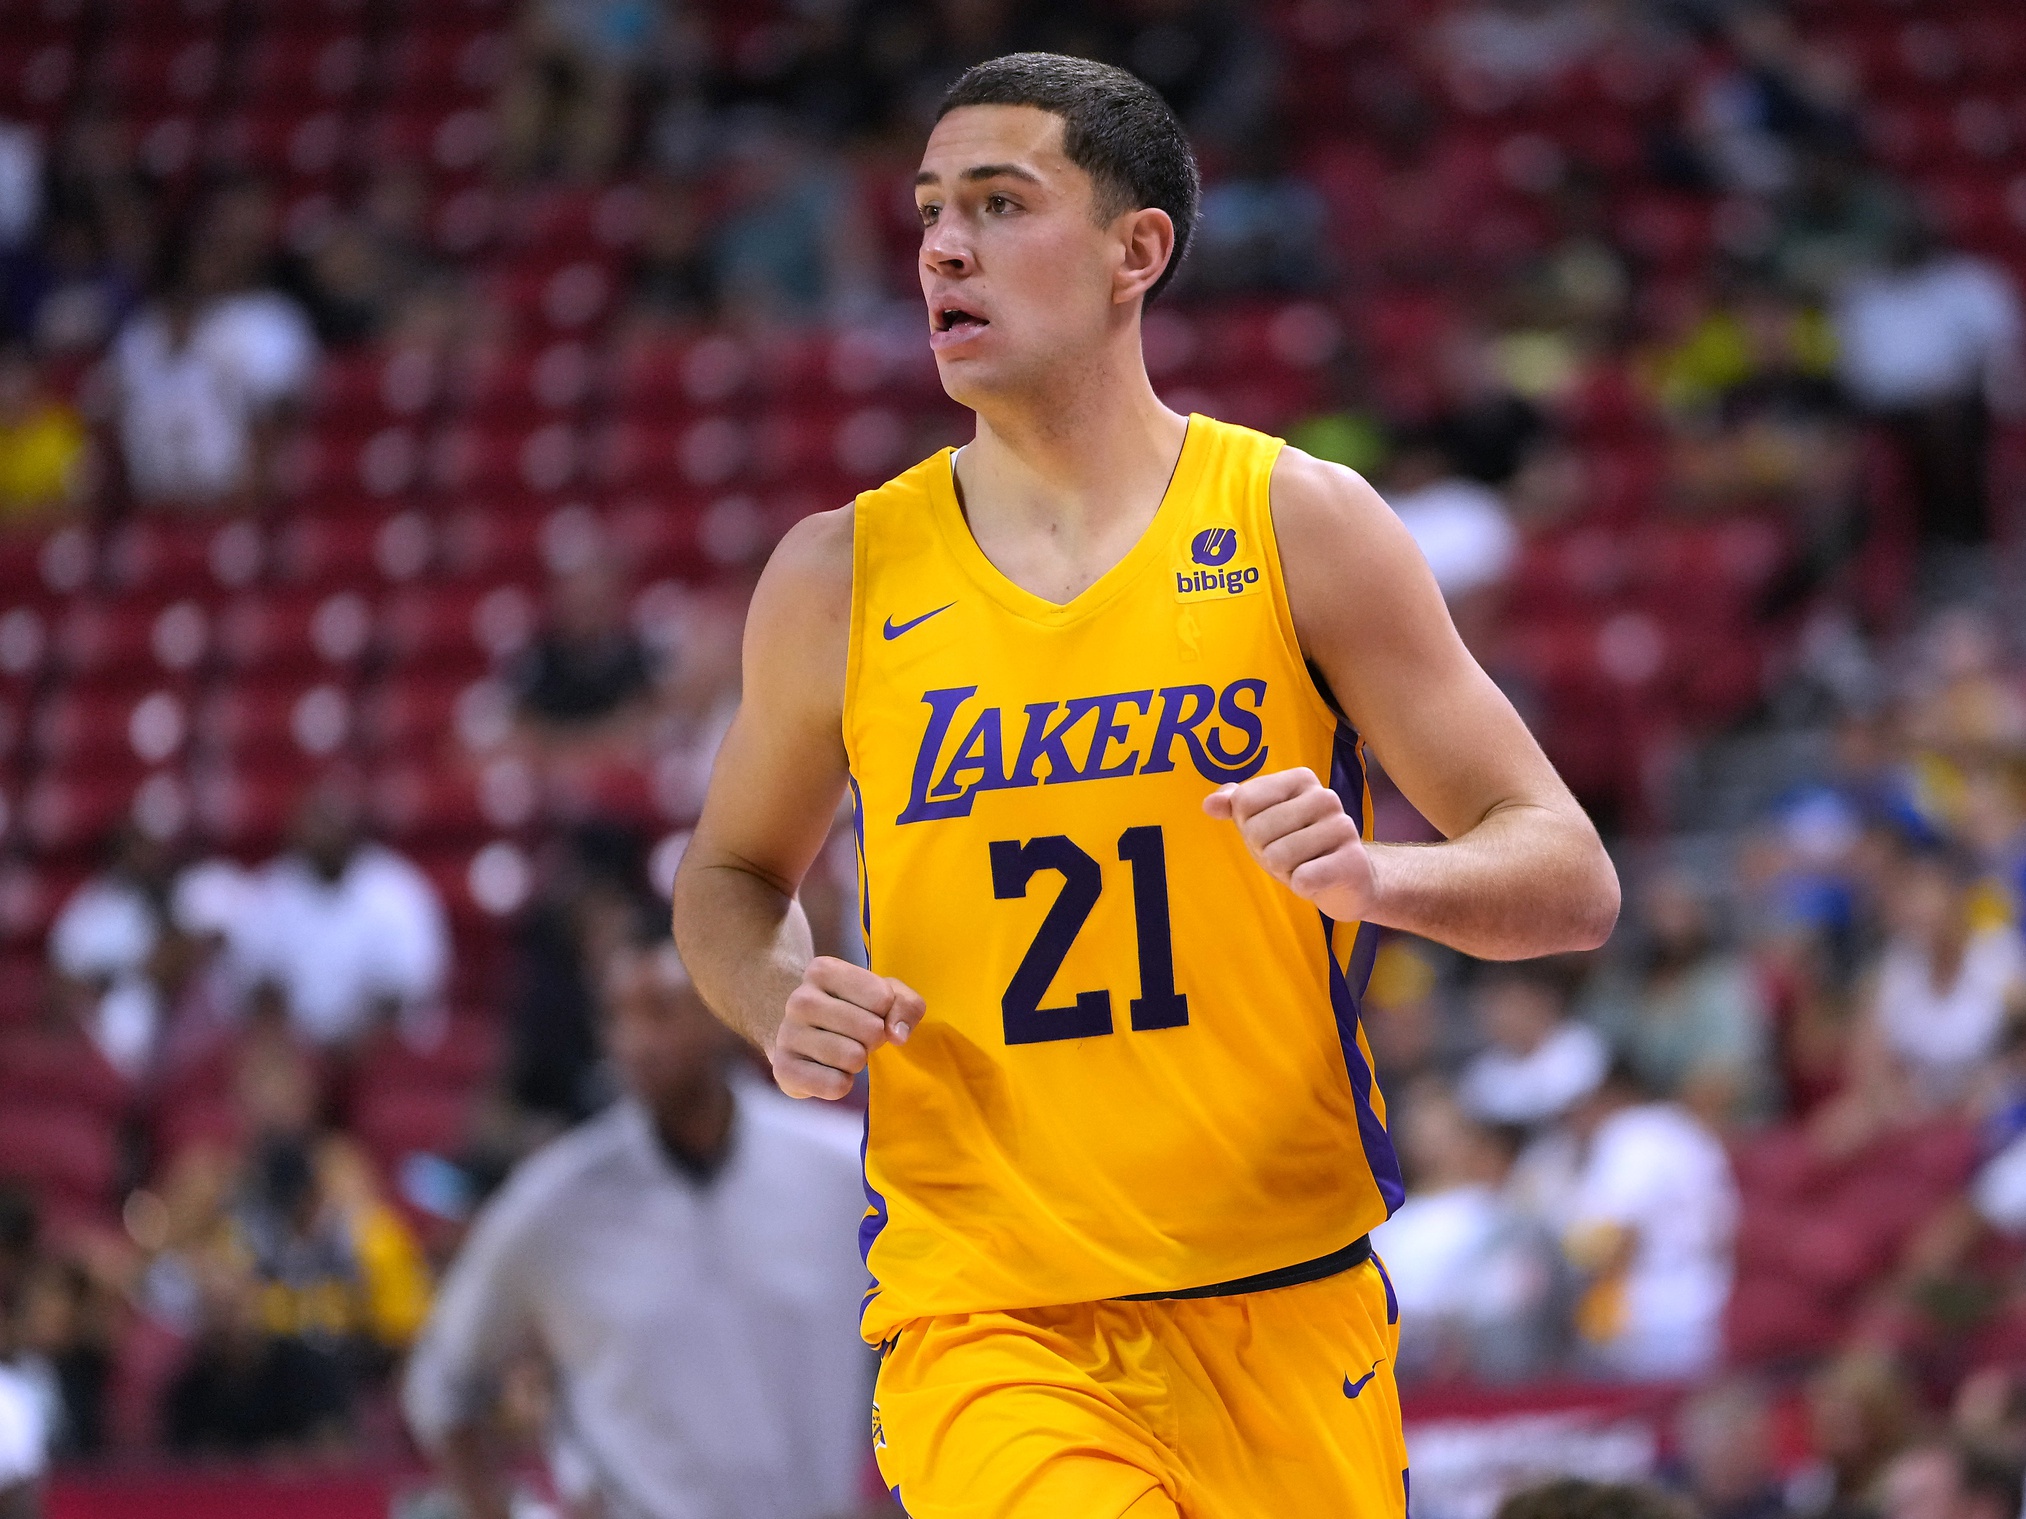 Jul 15, 2022; Las Vegas, NV, USA; Los Angeles Lakers forward Cole Swider (21) is pictured during an NBA Summer League game against the New Orleans Pelicans at Thomas & Mack Center. Mandatory Credit: Stephen R. Sylvanie-USA TODAY Sports